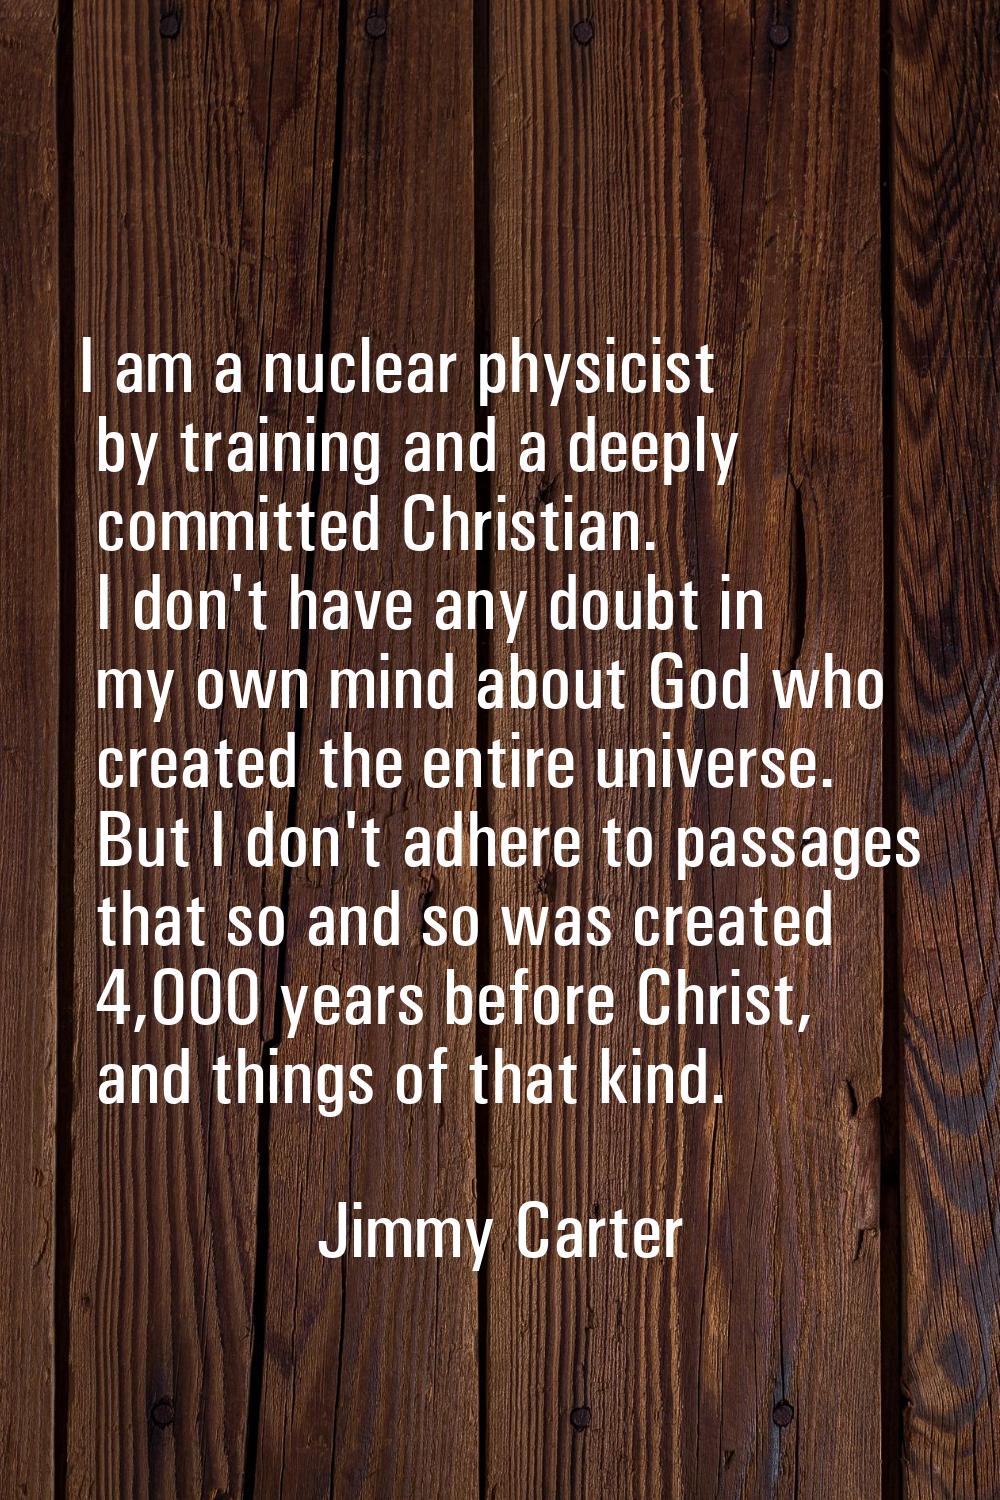 I am a nuclear physicist by training and a deeply committed Christian. I don't have any doubt in my